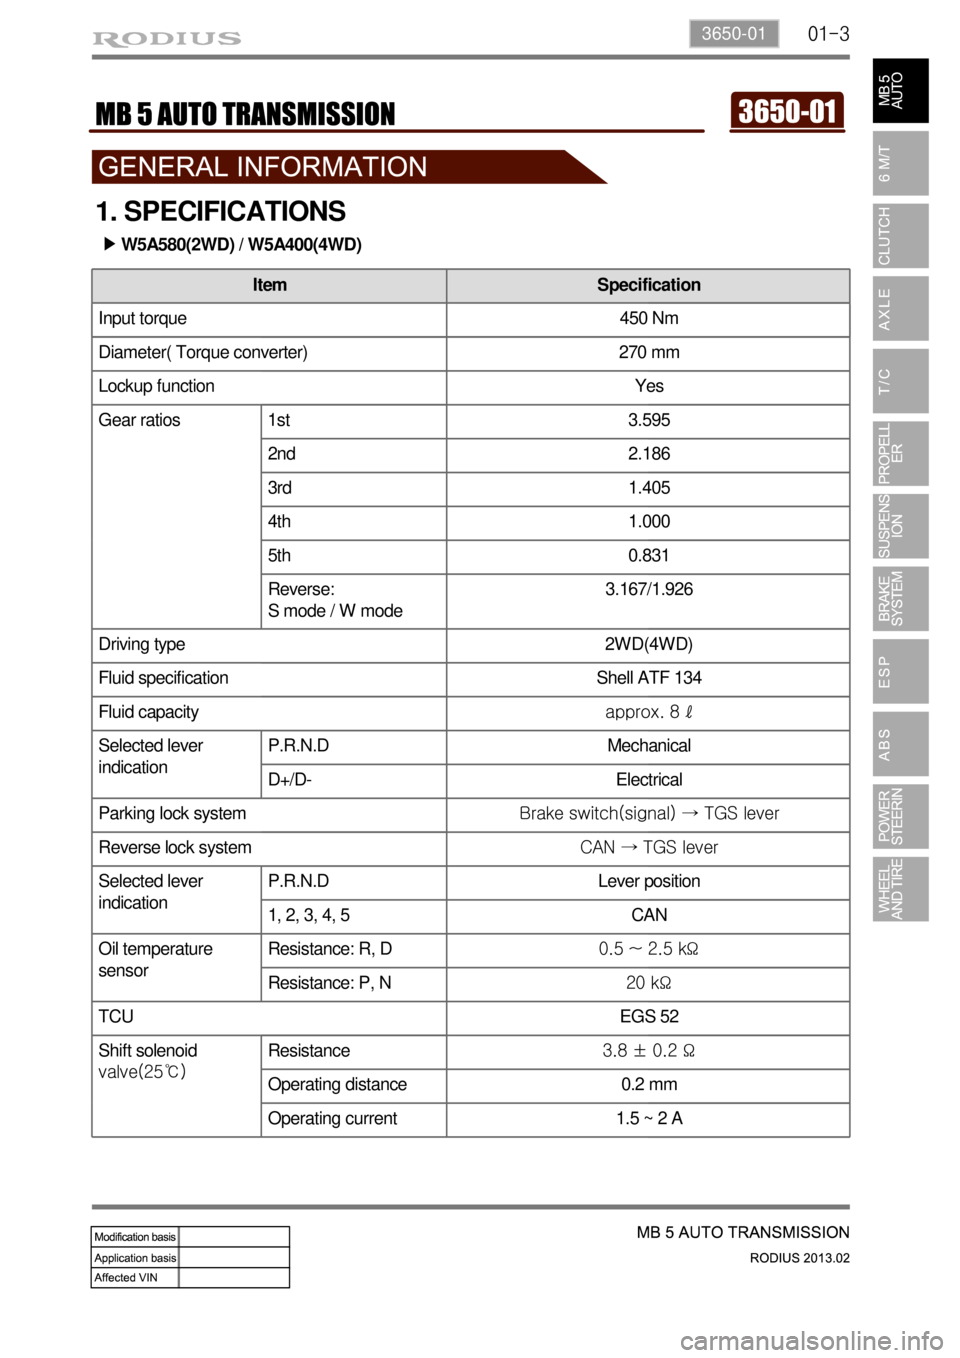 SSANGYONG TURISMO 2013  Service Manual 01-33650-01
Diameter( Torque converter) 270 mm 
Lockup function Yes
Gear ratios 1st 3.595 
2nd 2.186 
3rd 1.405 
4th 1.000 
5th 0.831 
Reverse:
S mode / W mode3.167/1.926 
Driving type 2WD(4WD) 
Fluid